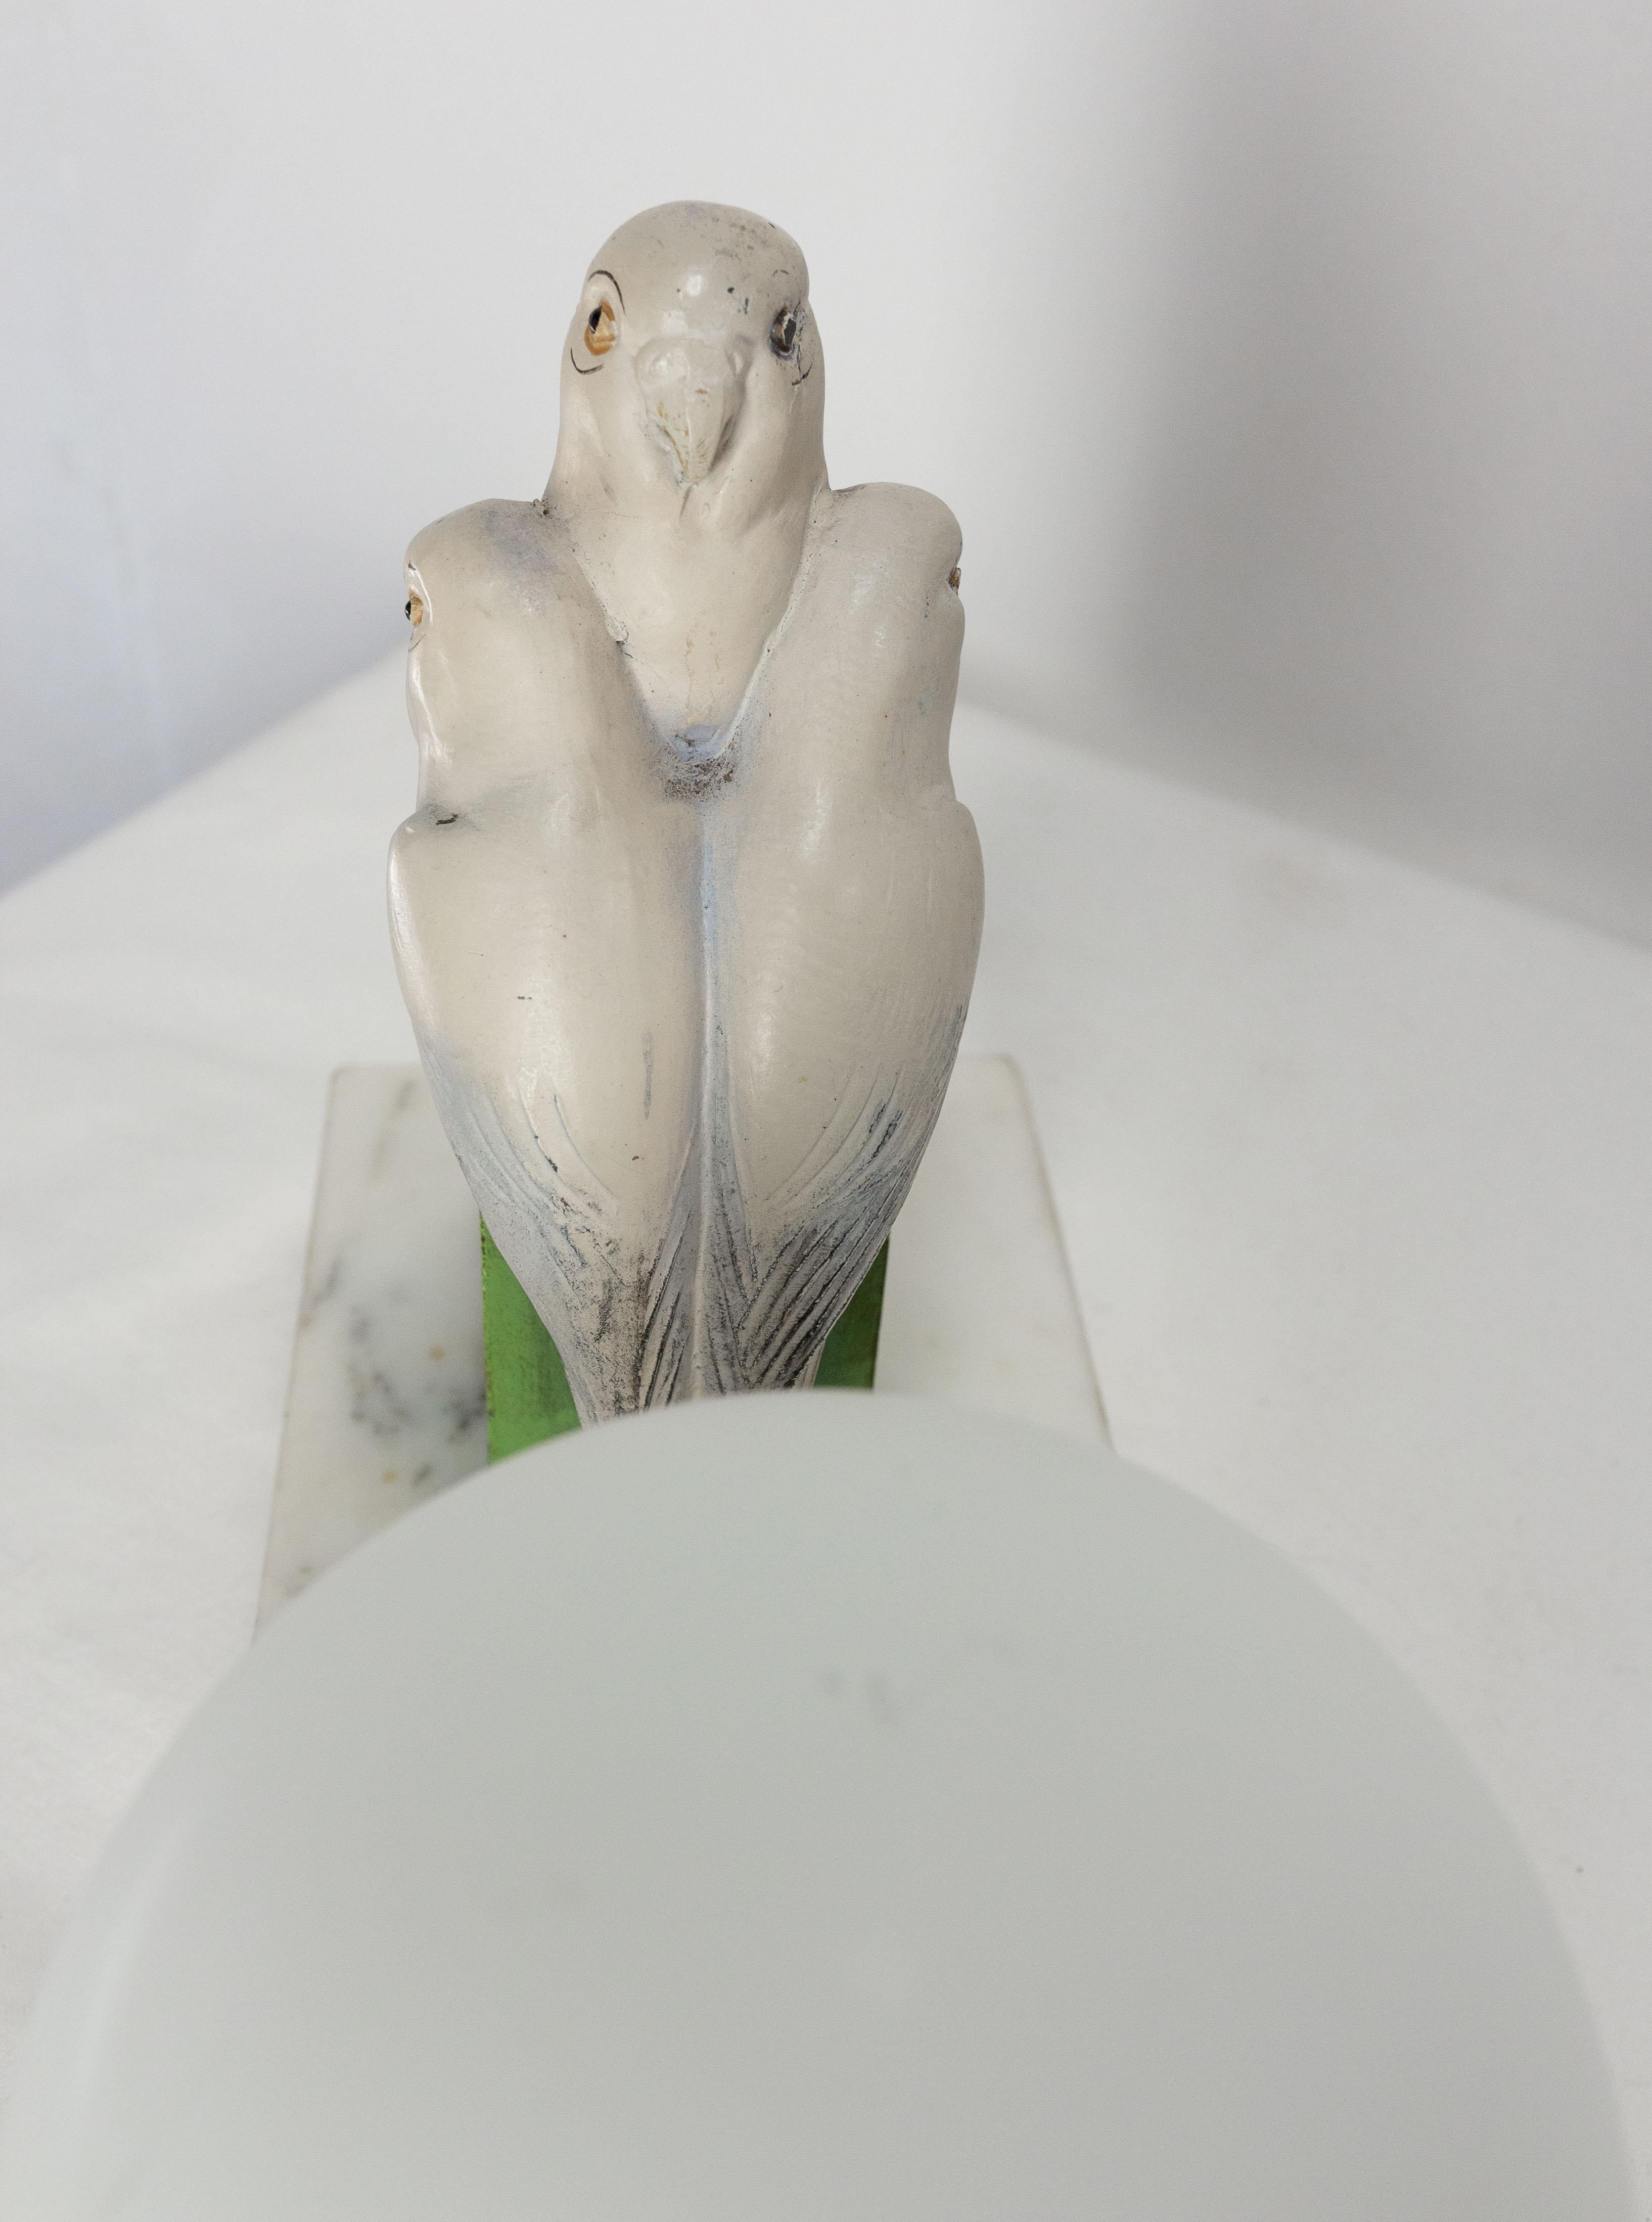 French Art Deco Table Lamp, Painted Spelter & Marble, Three Parakeets, c. 1930 For Sale 1